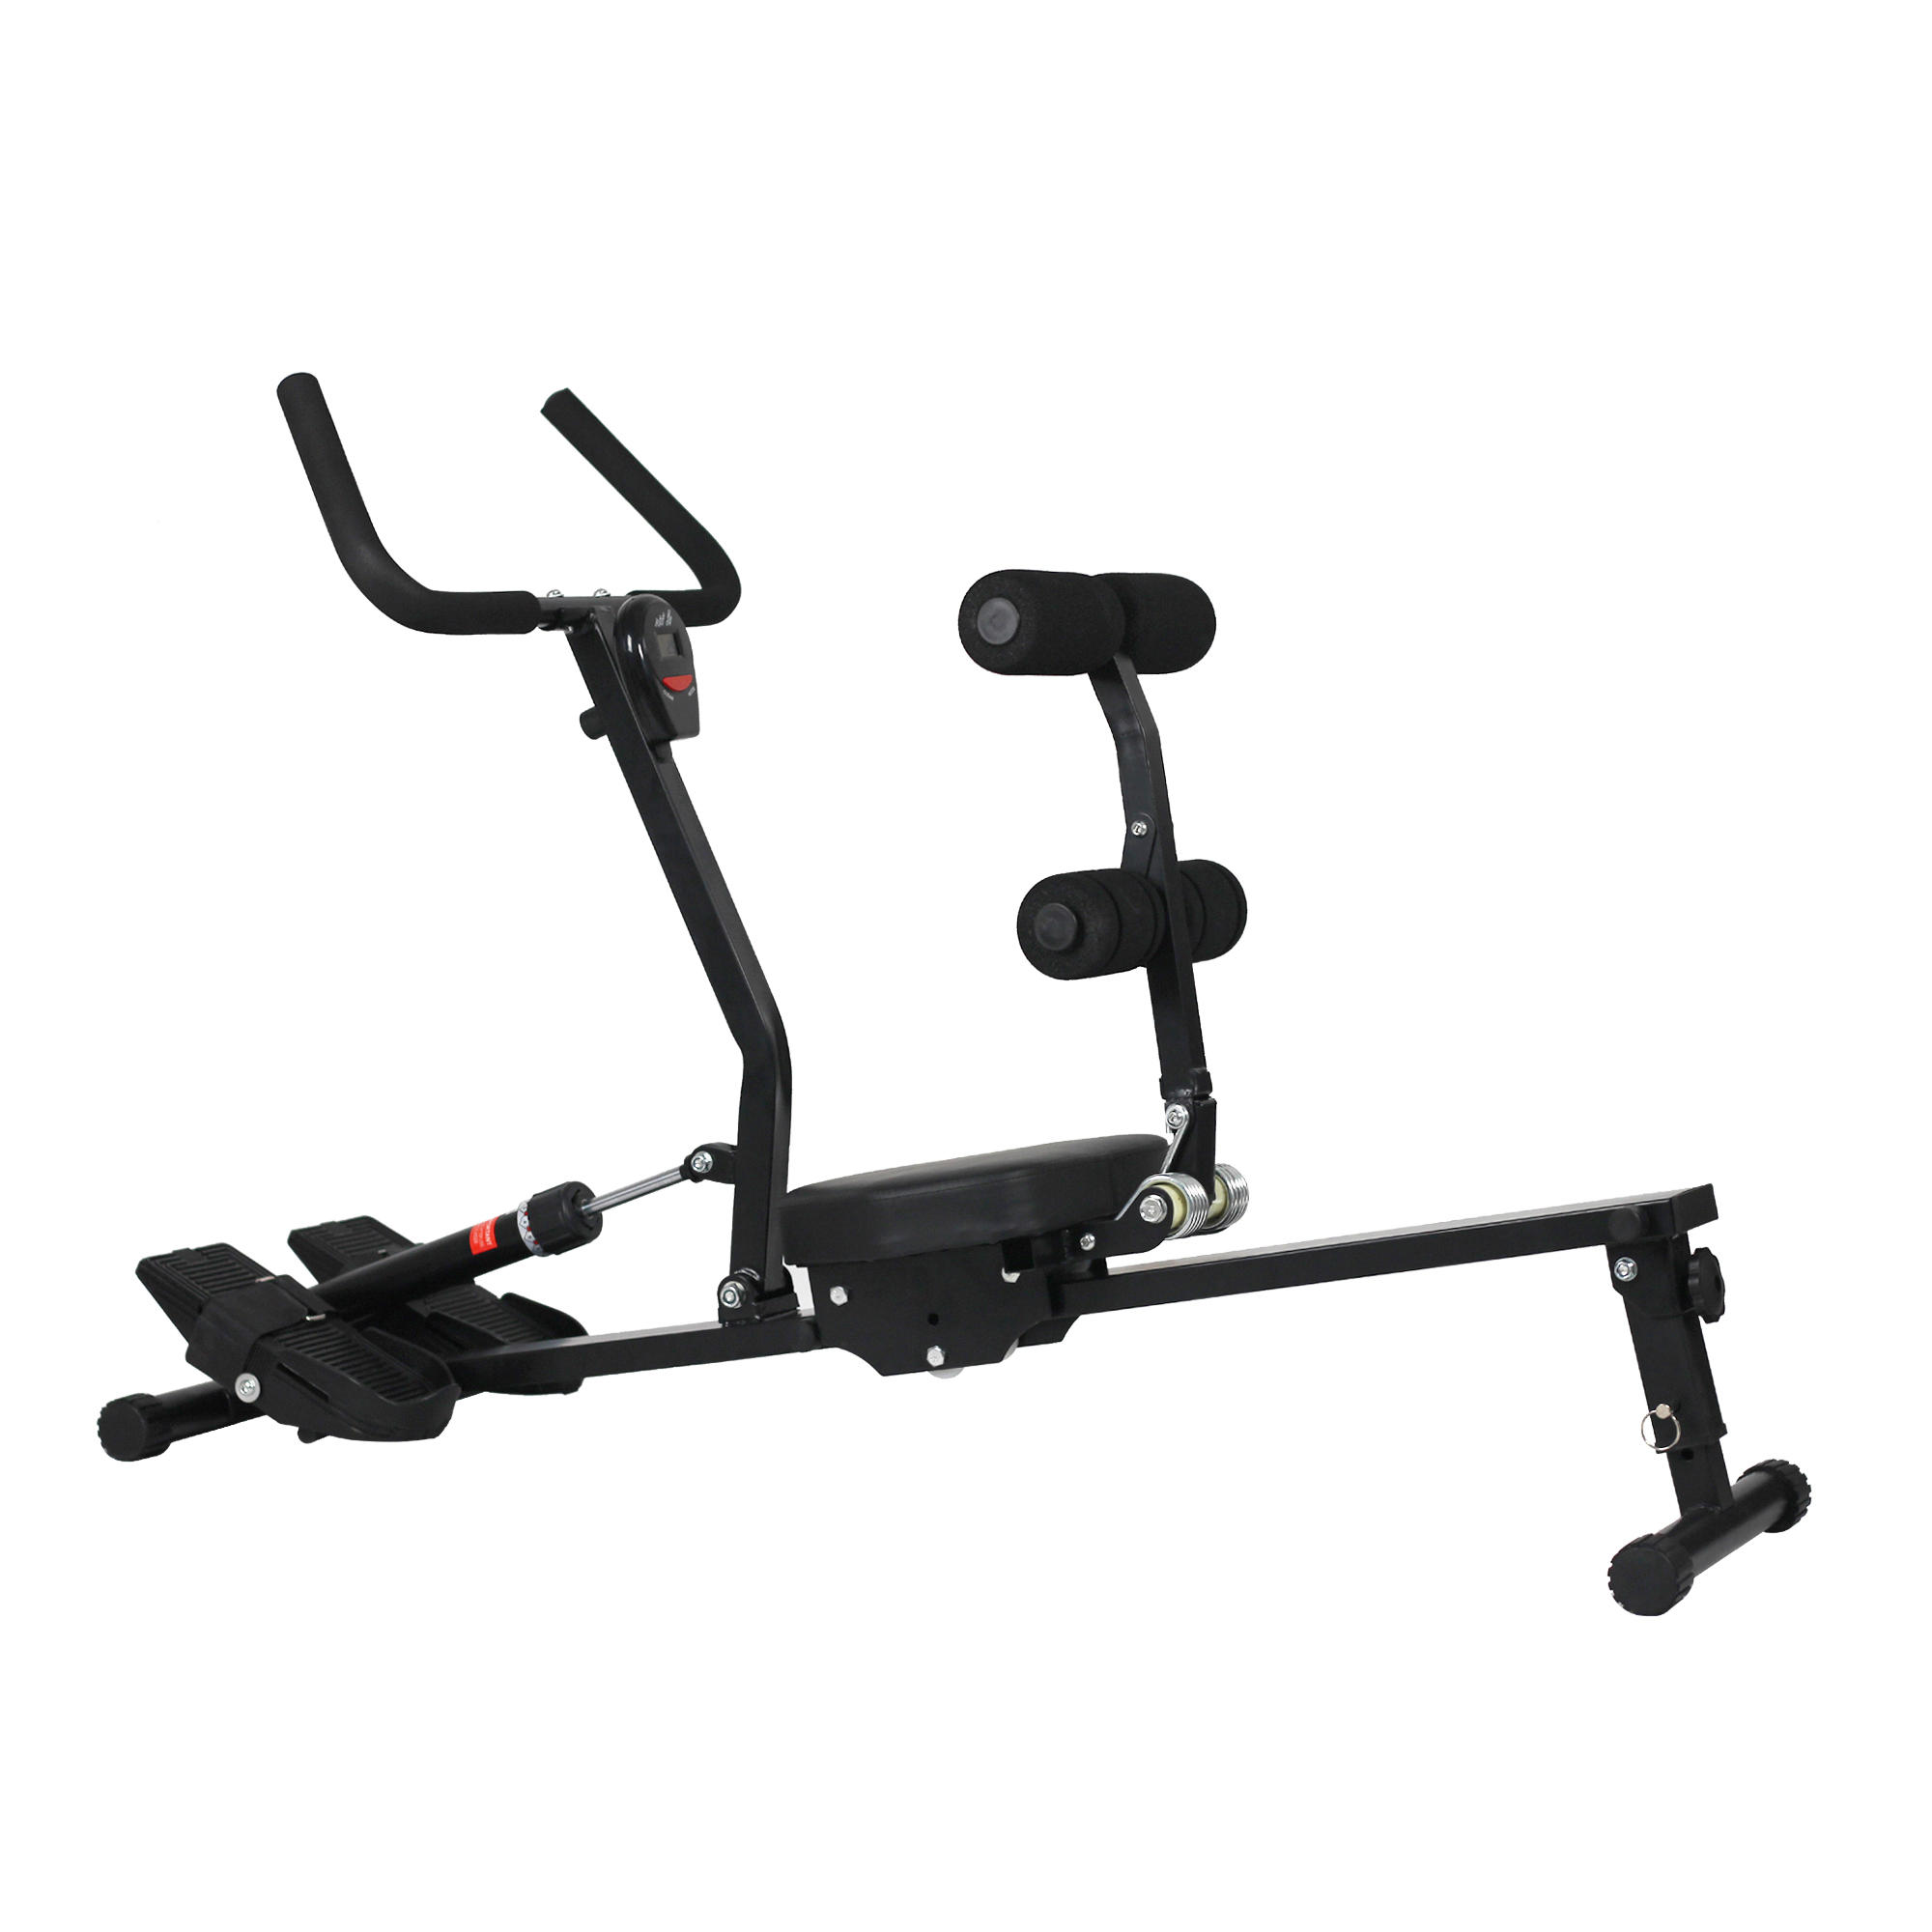 Maximizing Fitness at Home: The Convenience of Foldable Compact Rowing Machines